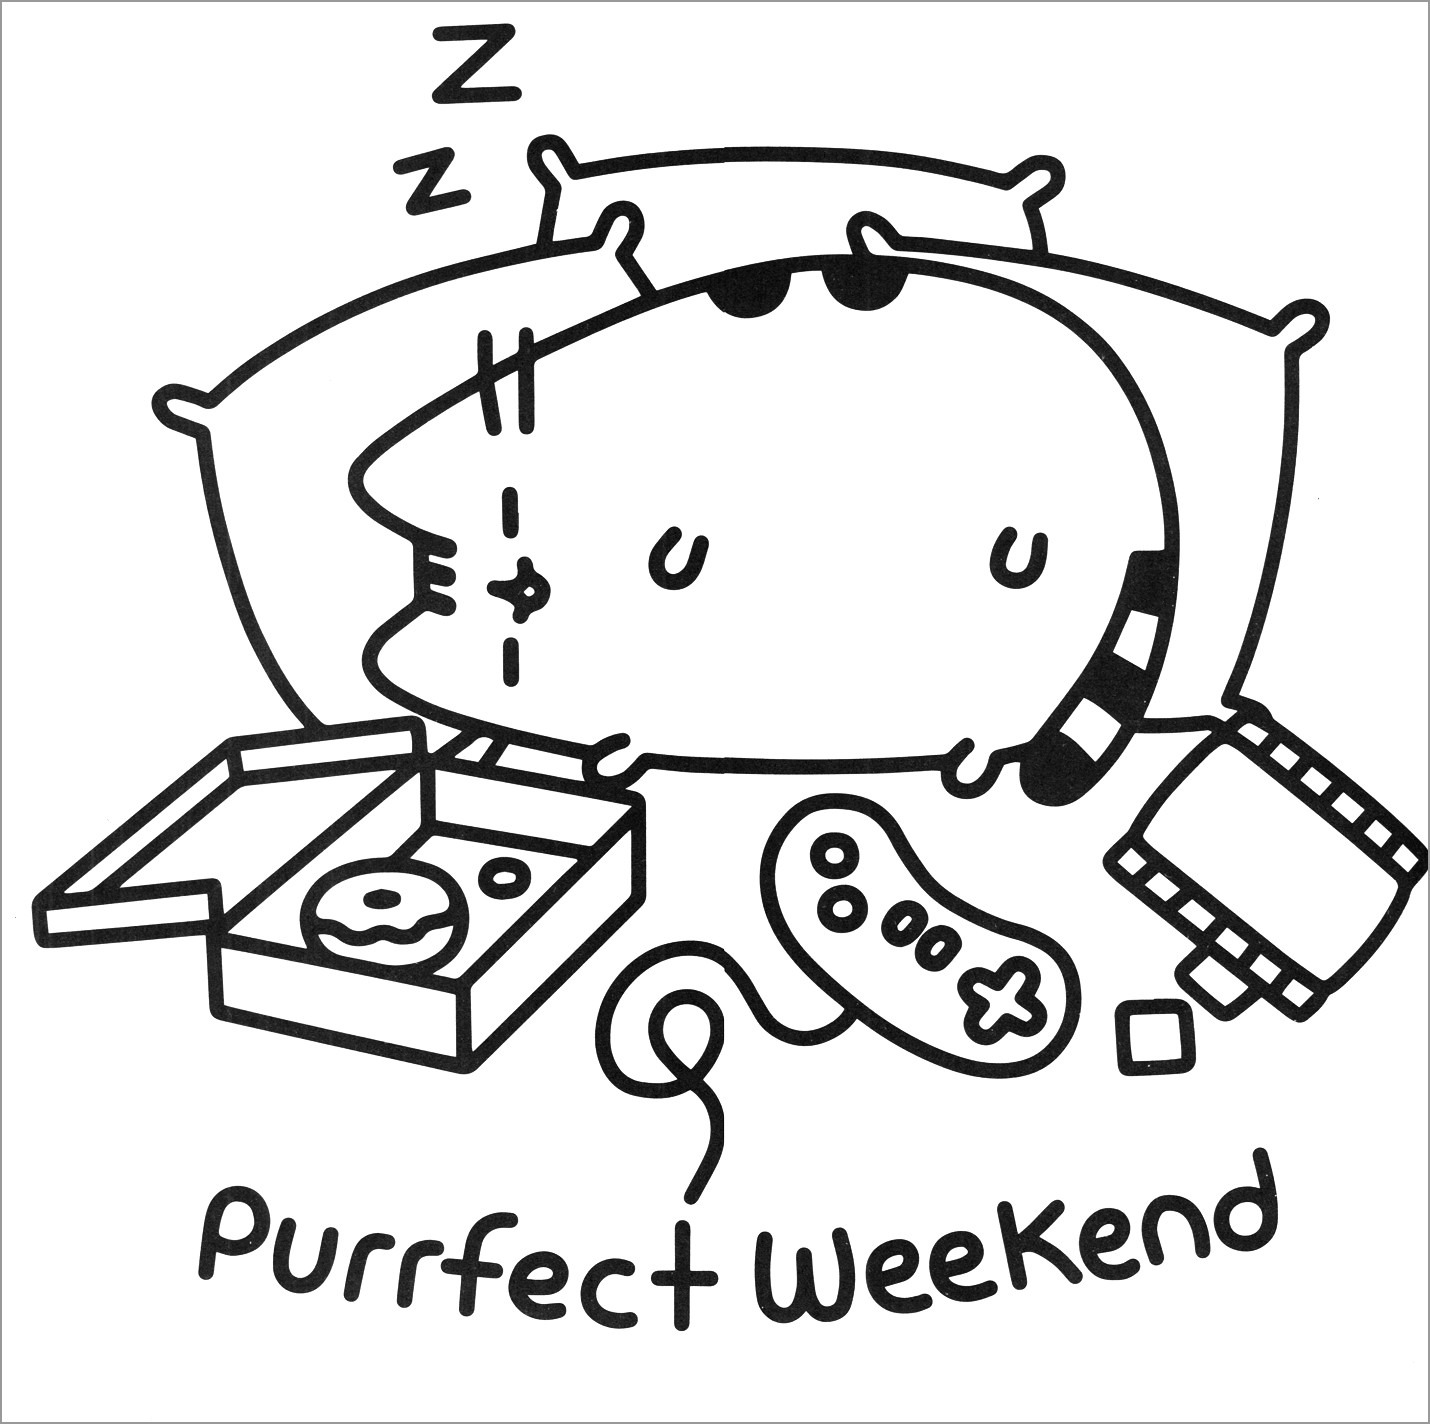 Purrfect Weekend Pusheen Coloring Page